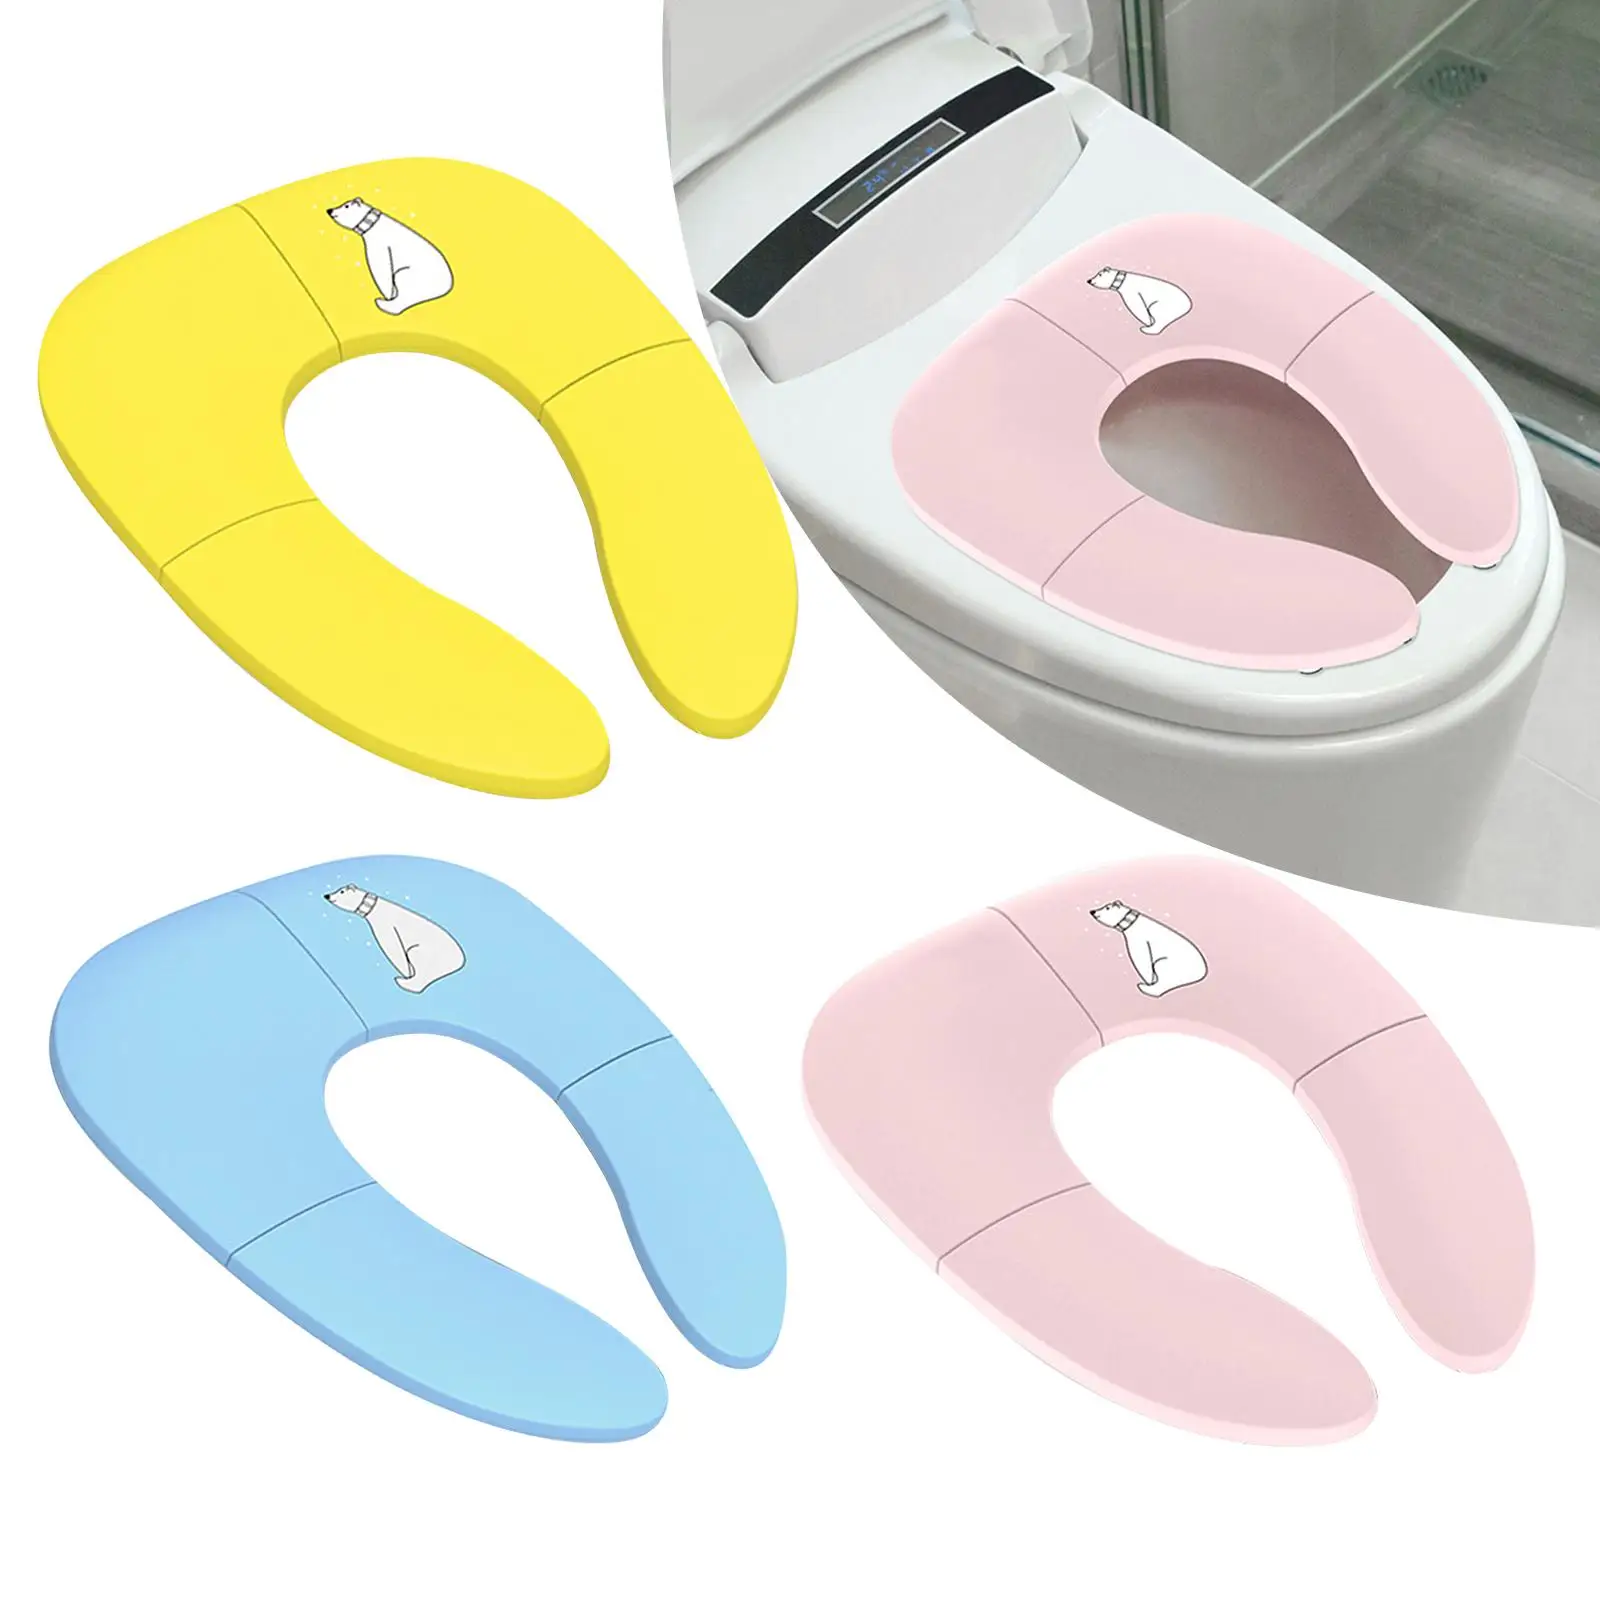 Foldable Toilet Cover Upgraded training Seat Portable Potty Ring Toilet Seat Toilet Cushion child Toddler Baby Kids